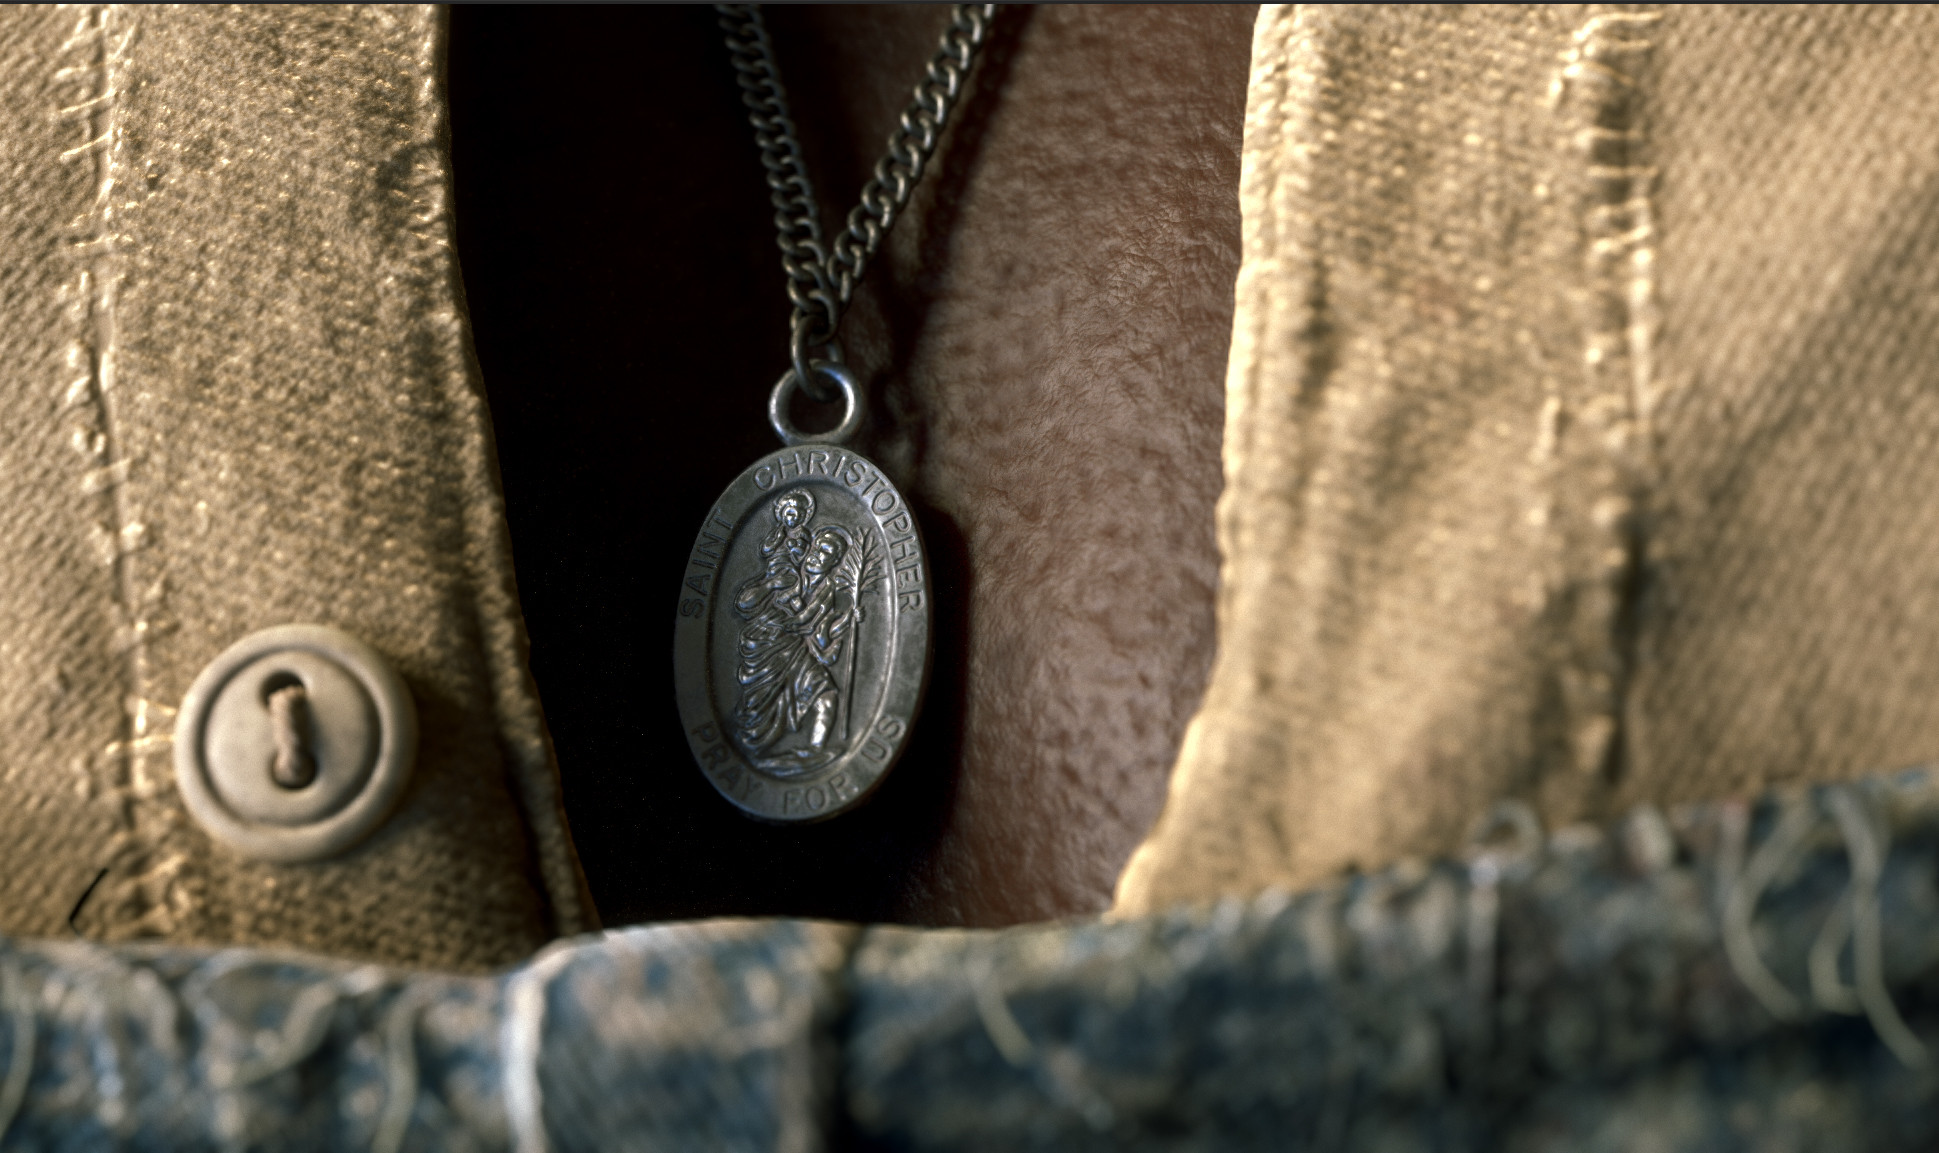 Details Pendant (Mentioned briefly in the film).